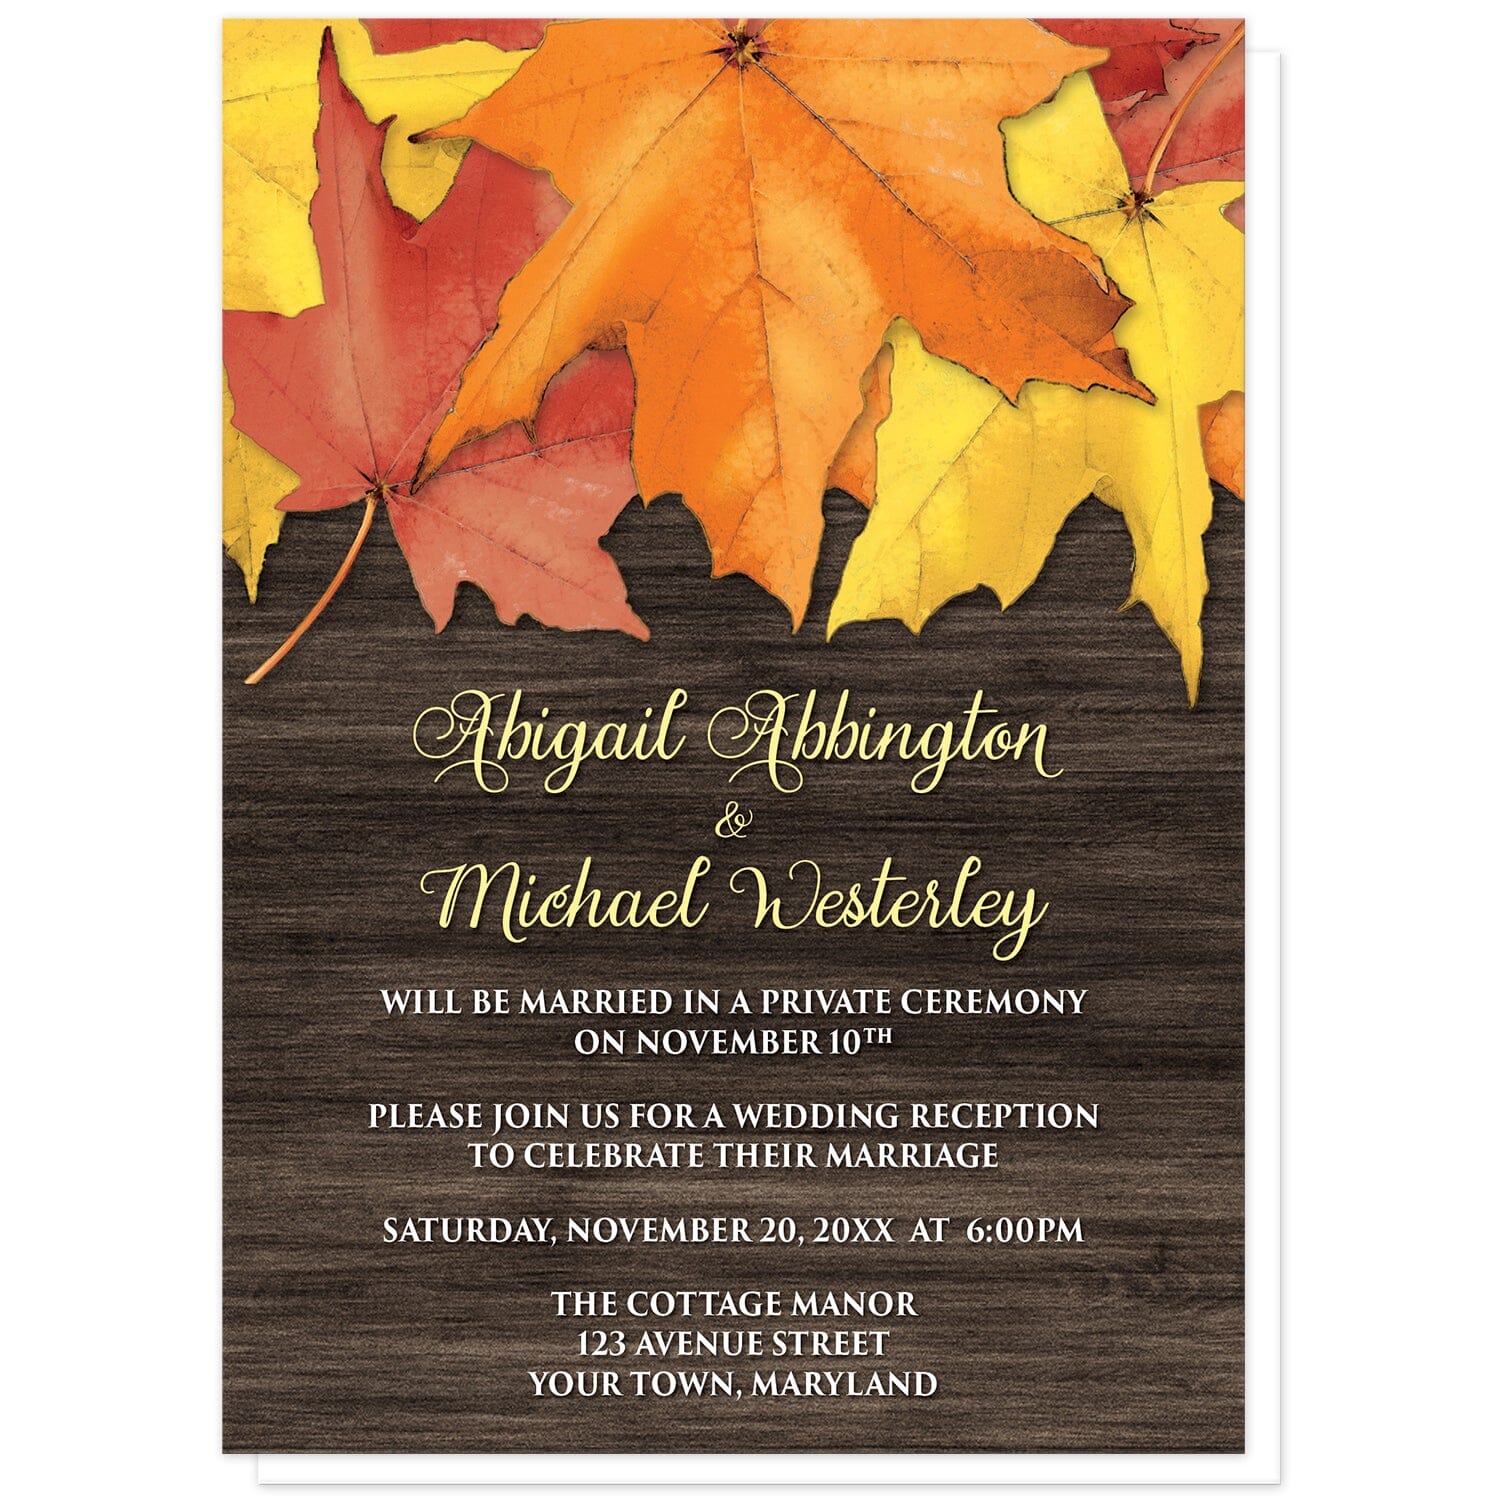 Rustic Autumn Leaves Wood Reception Only Invitations at Artistically Invited. Southern-inspired rustic autumn leaves wood reception only invitations with an arrangement of rustic yellow, orange, and red fall leaves along the top over a dark brown wood pattern. Your personalized post-wedding reception celebration details are custom printed in yellow and white over the rustic wood background. 